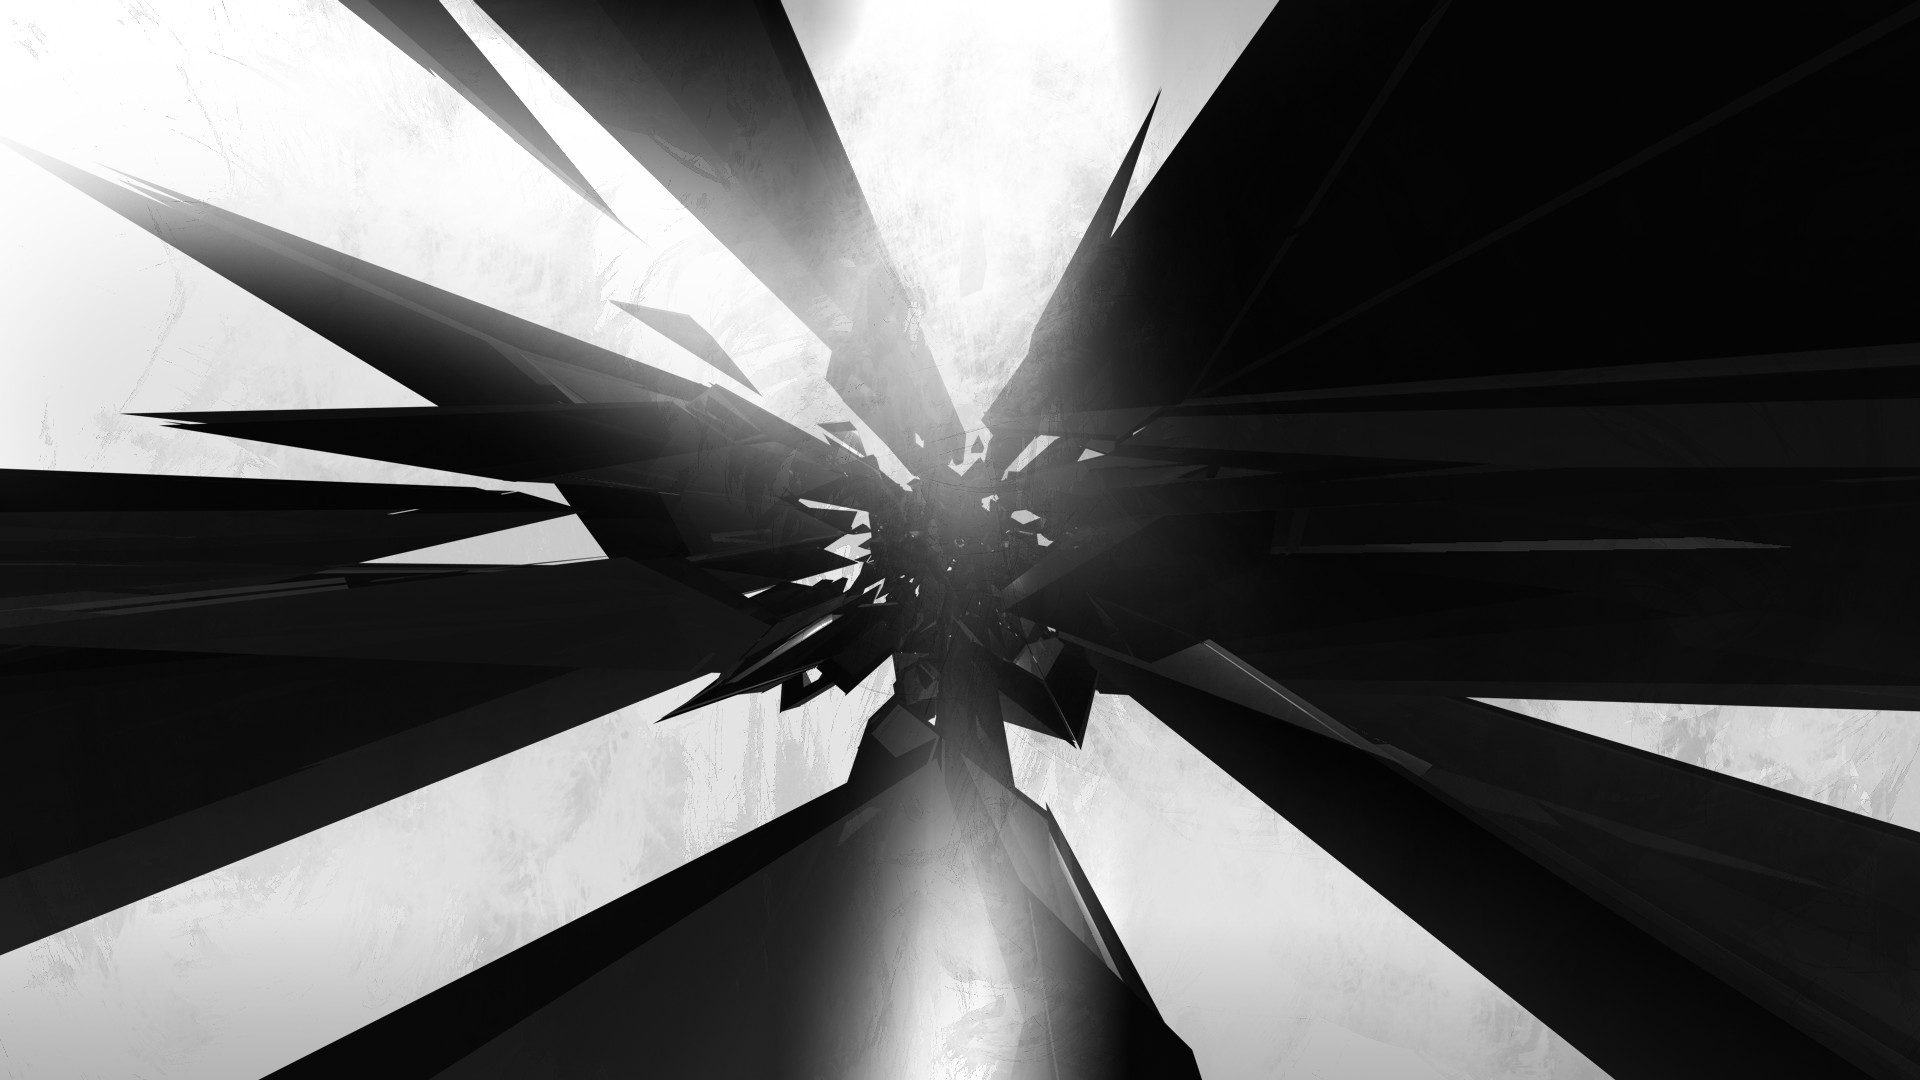 1920x1080 Abstract Black And White Art E2 80 94 Crafthubs Wallpaper. studio  apartments design. apartment ...